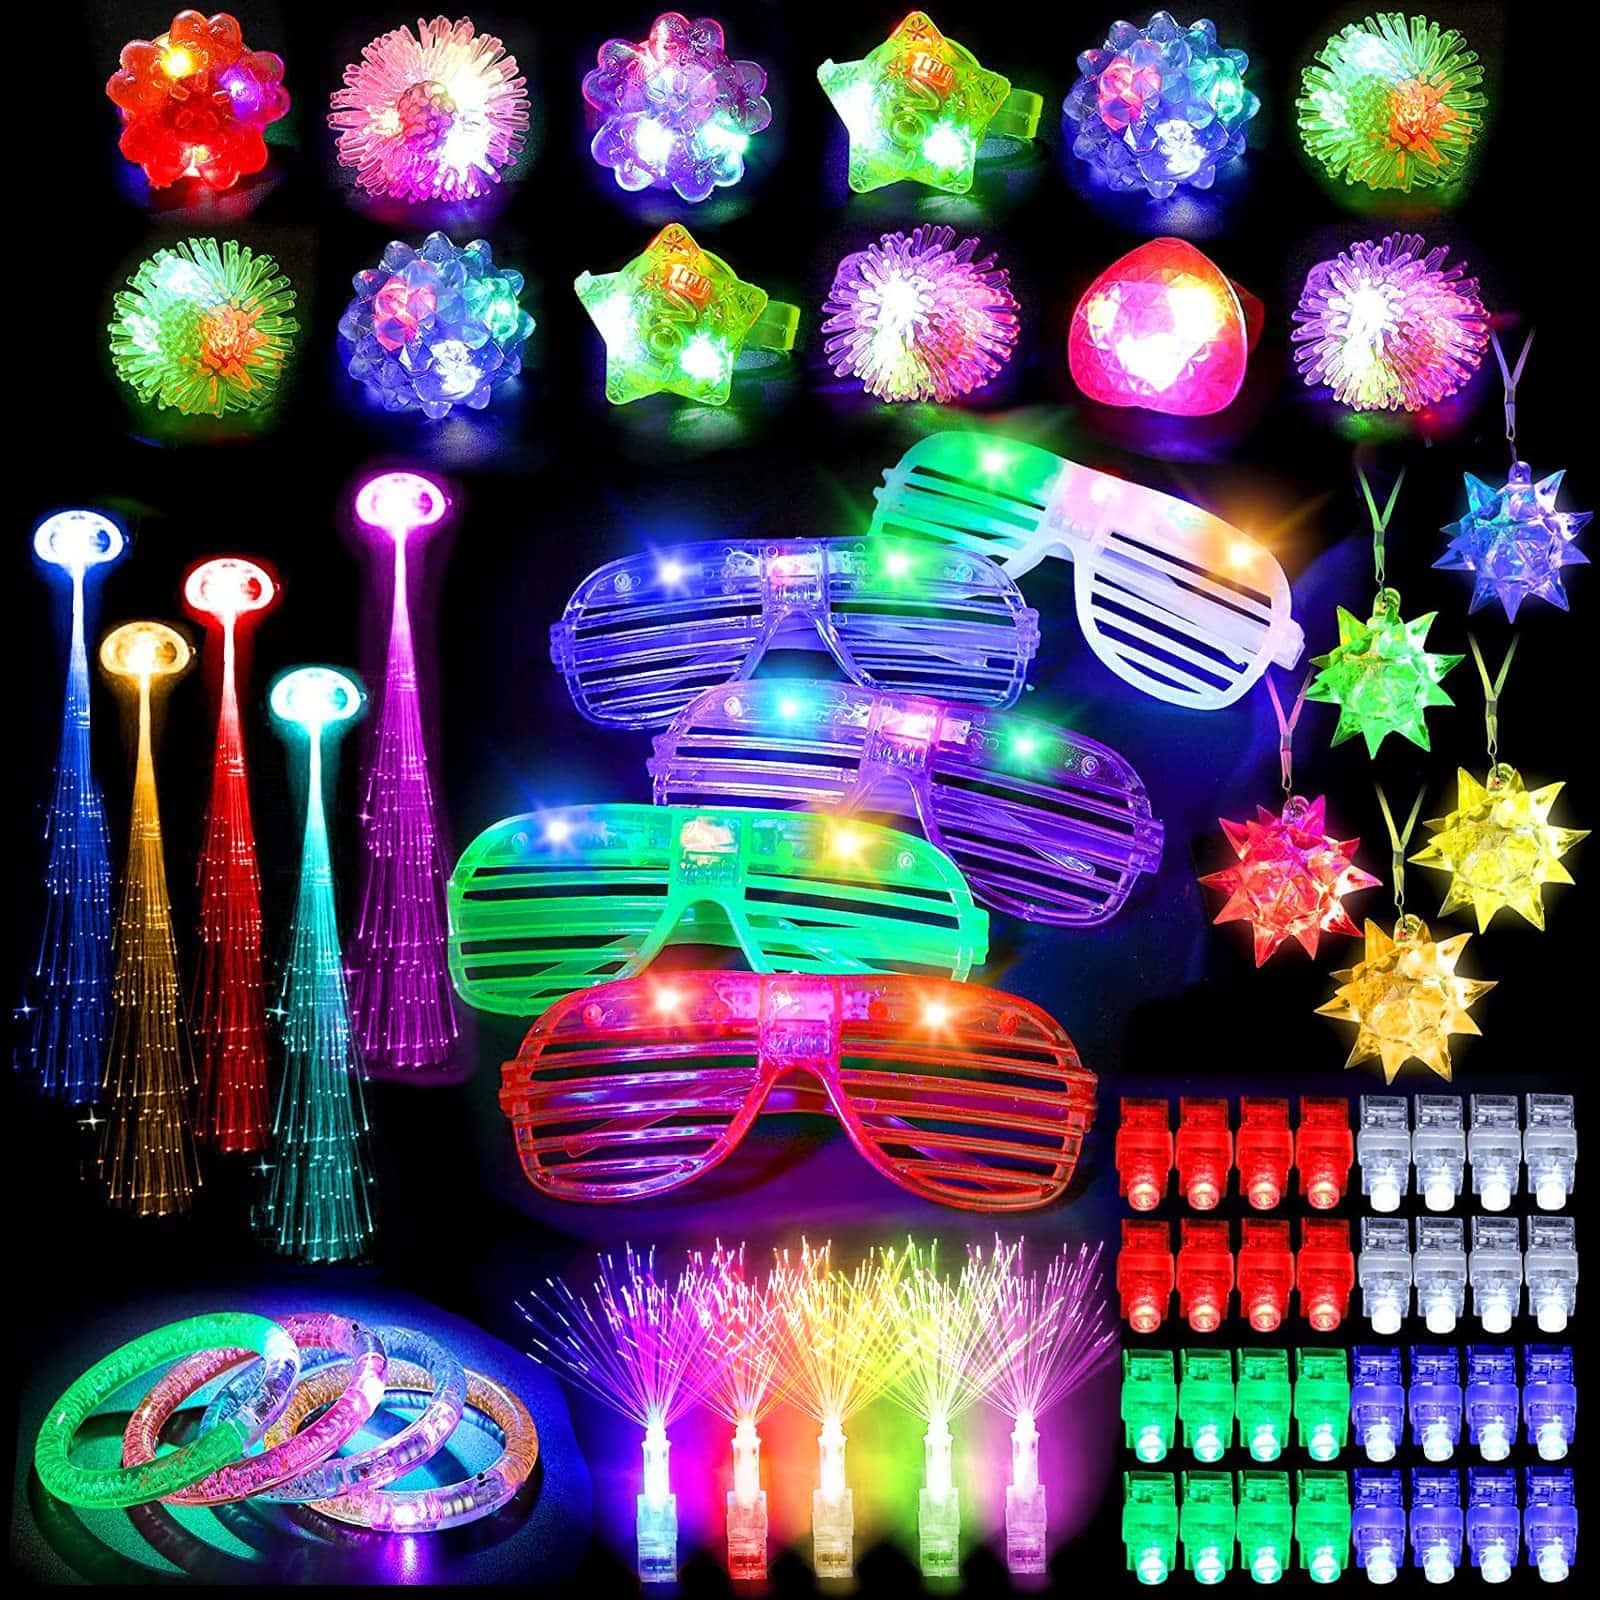 A Variety Of Party Supplies Including Glasses, Confetti, And Confetti